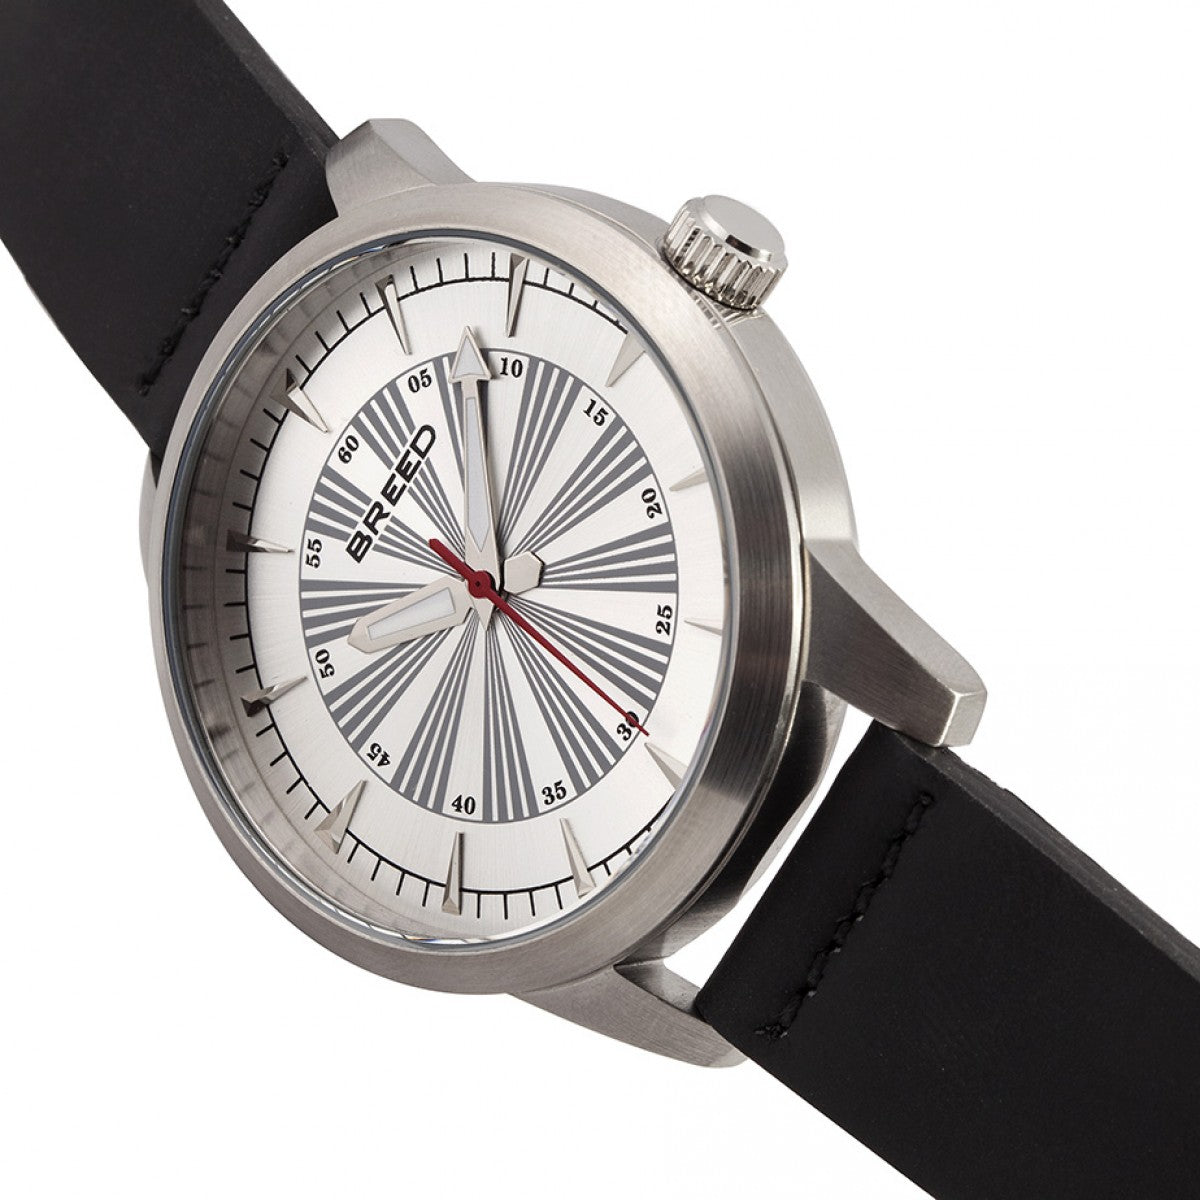 Breed Renegade Leather-Band Watch - Silver/Black - BRD7701